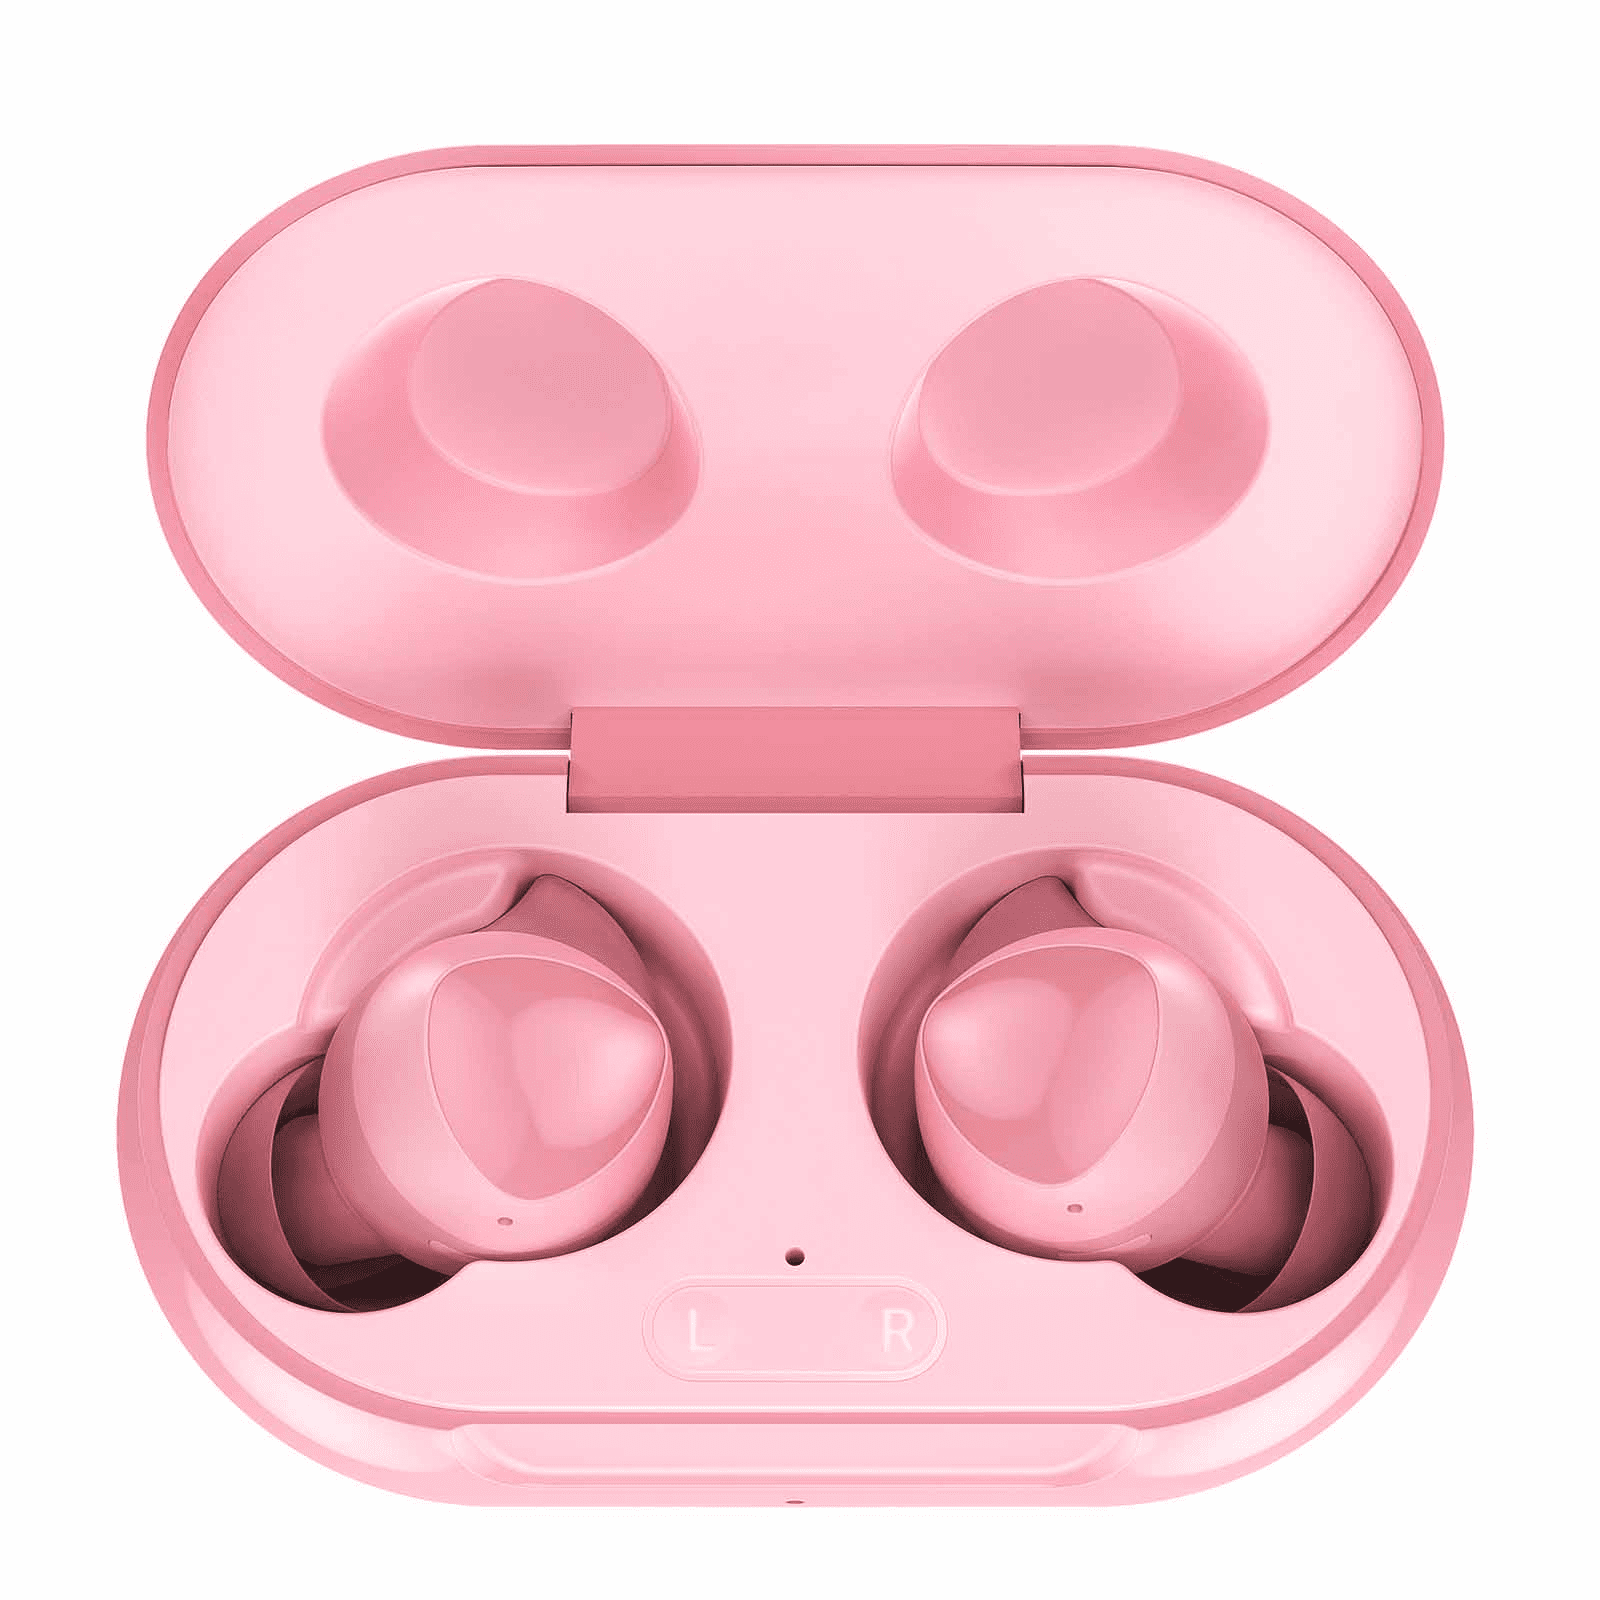 Eik Nieuwjaar Ontspannend UrbanX Street Buds Plus True Bluetooth Wireless Earbuds For Huawei Mate 9  Porsche Design With Active Noise Cancelling (Charging Case Included) Pink -  Walmart.com